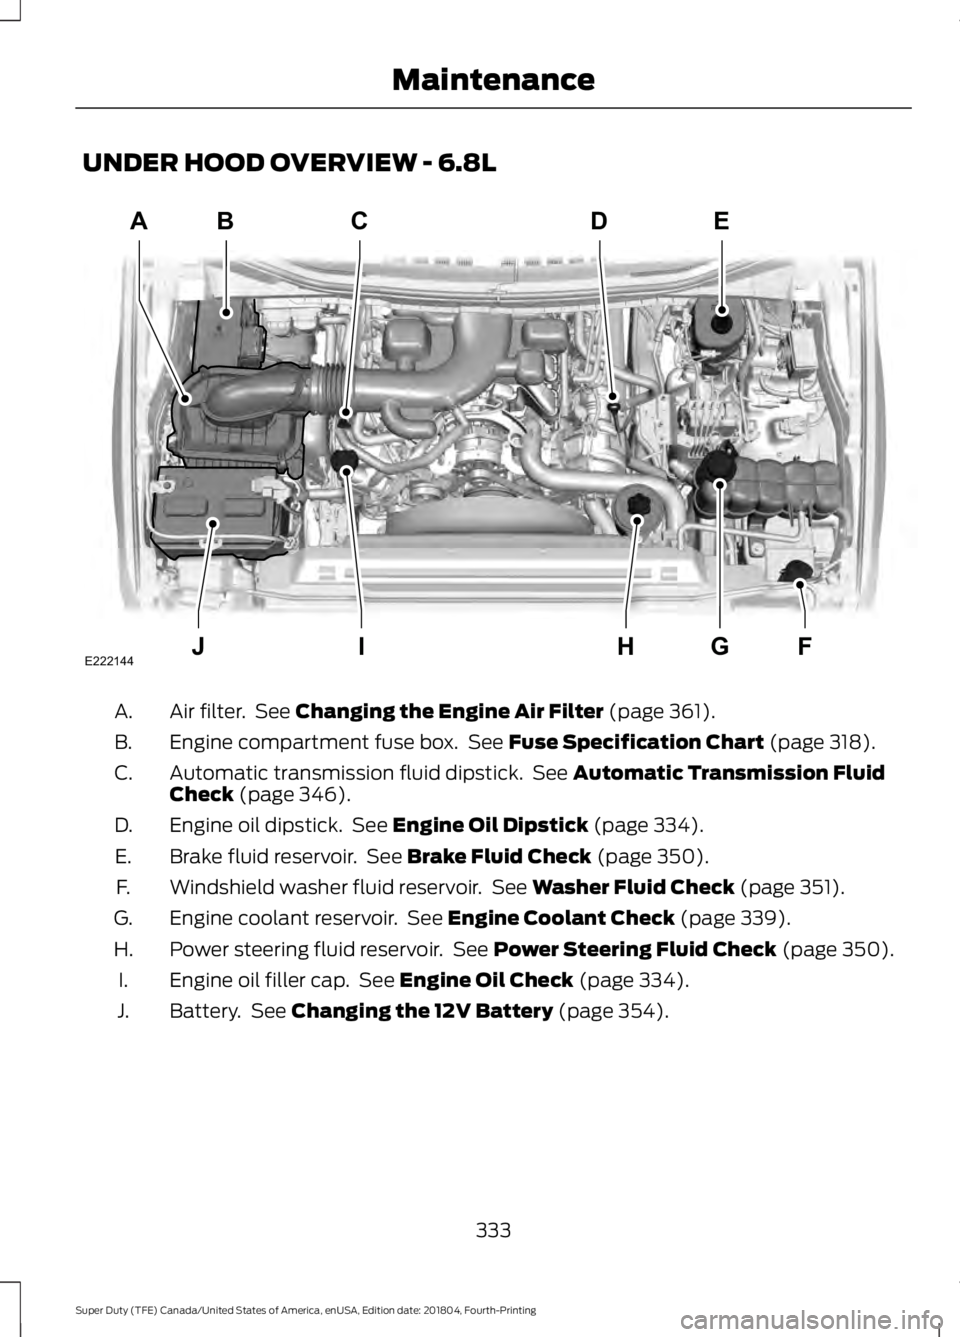 FORD F-350 2019  Owners Manual UNDER HOOD OVERVIEW - 6.8L
Air filter.  See Changing the Engine Air Filter (page 361).
A.
Engine compartment fuse box.  See 
Fuse Specification Chart (page 318).
B.
Automatic transmission fluid dipsti